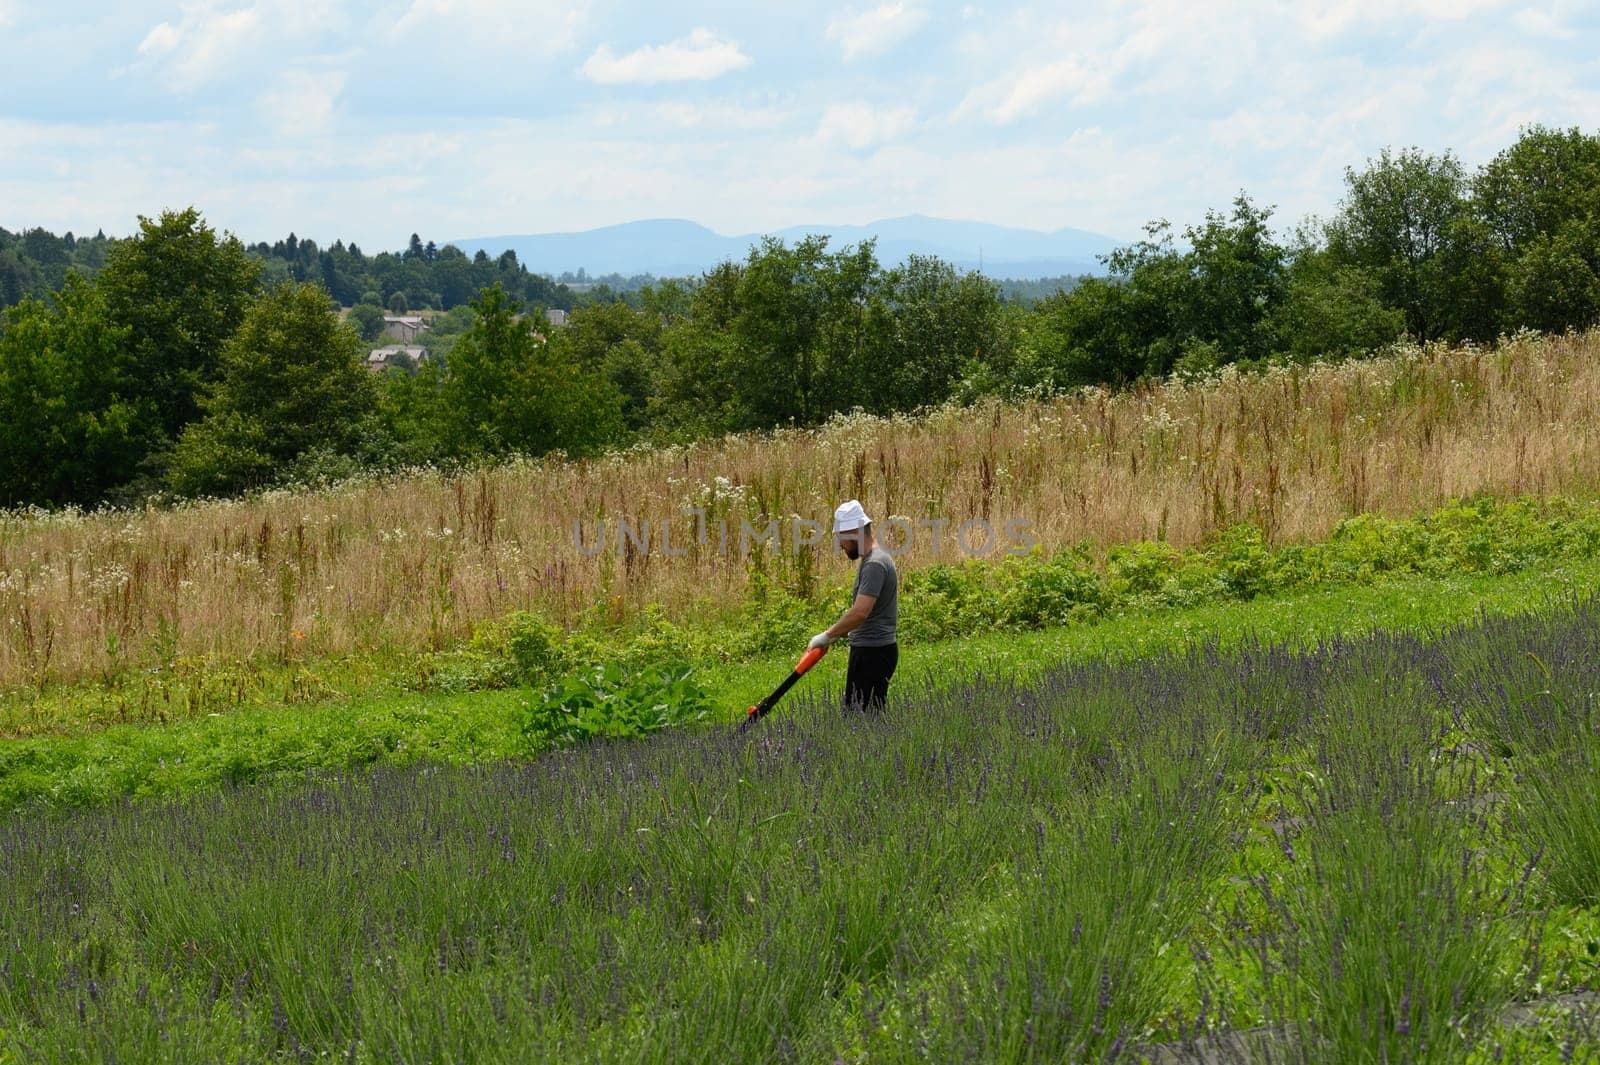 Care of a lavender field, a man mows the grass with an electric lawnmower, a young lavender field.